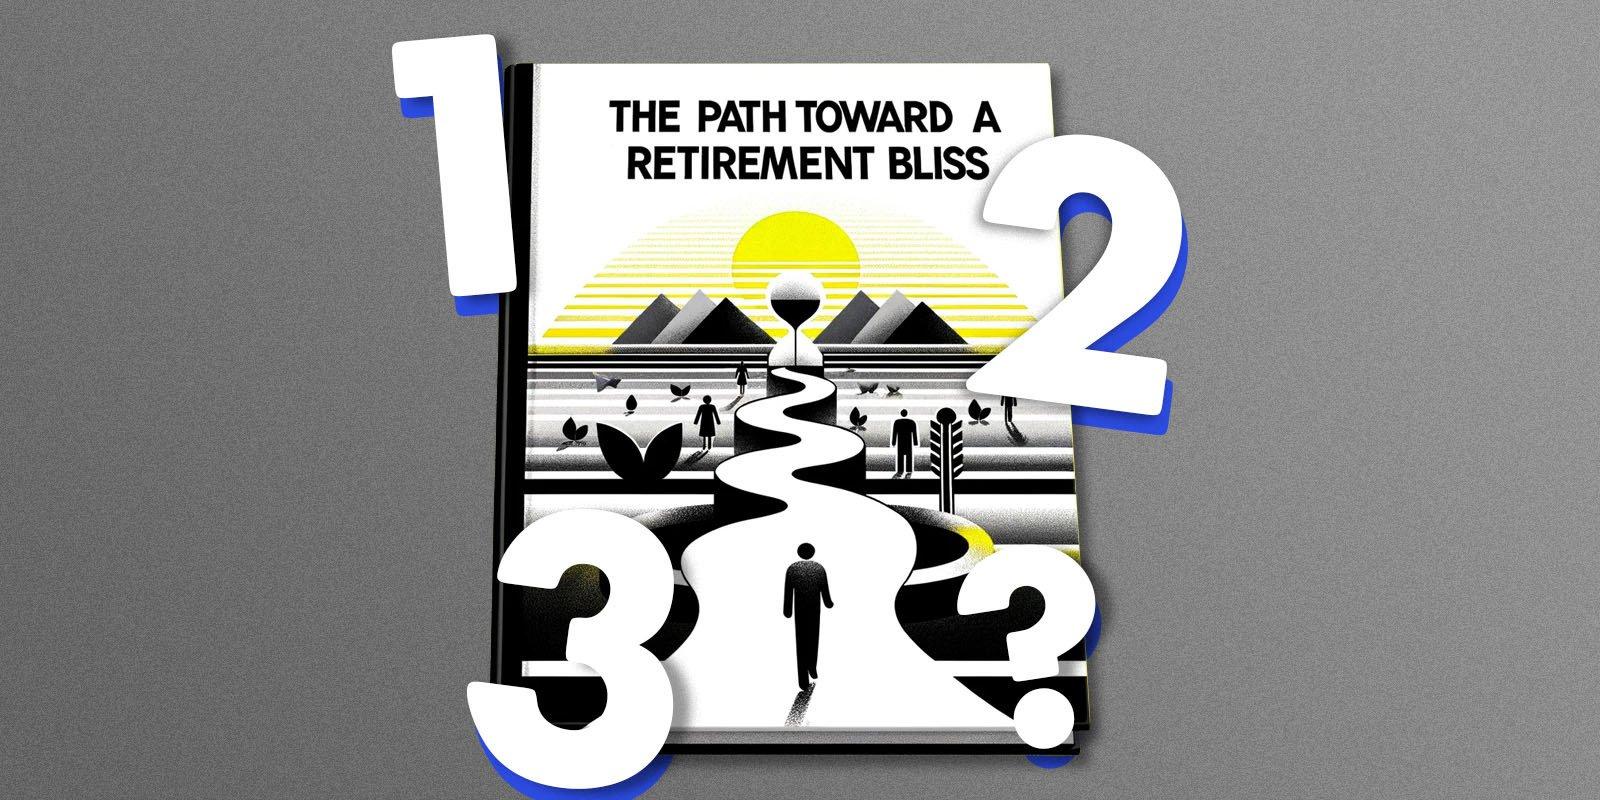 Three Questions To Put You On The Path Toward A Retirement Bliss